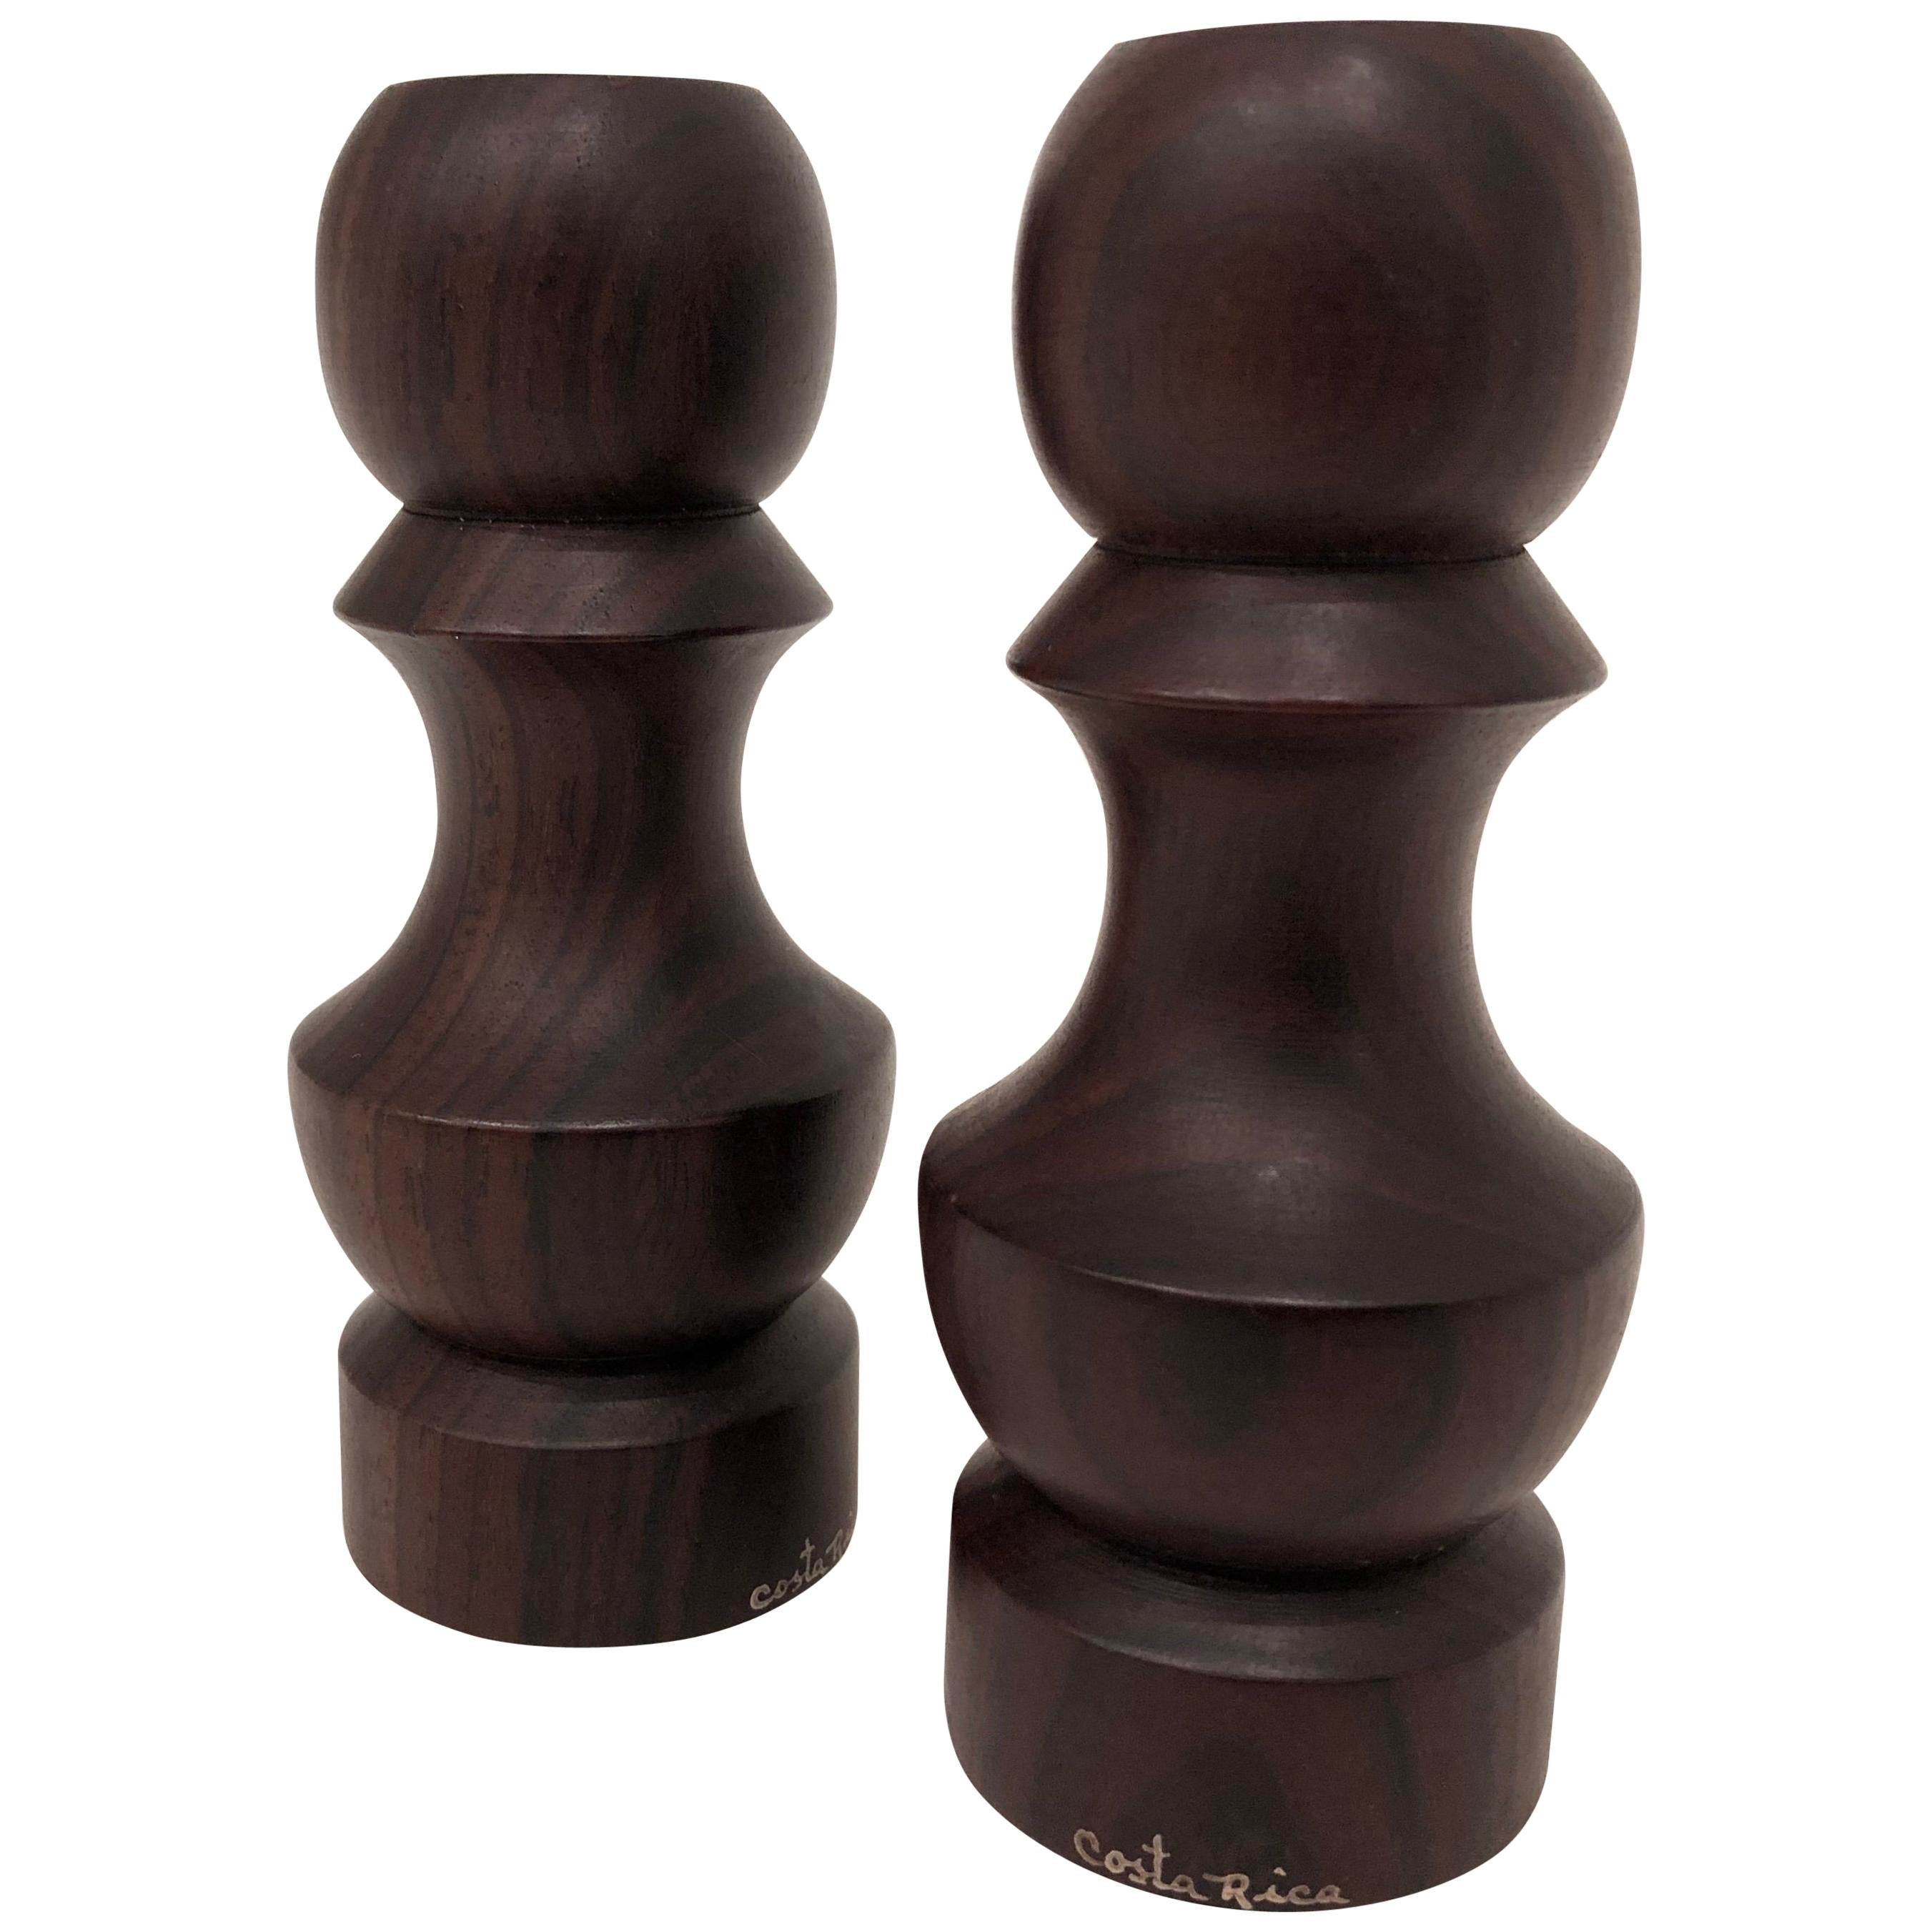 Pair of Danish Modern Solid Rosewood Hand Turned Salt and Pepper Shakers